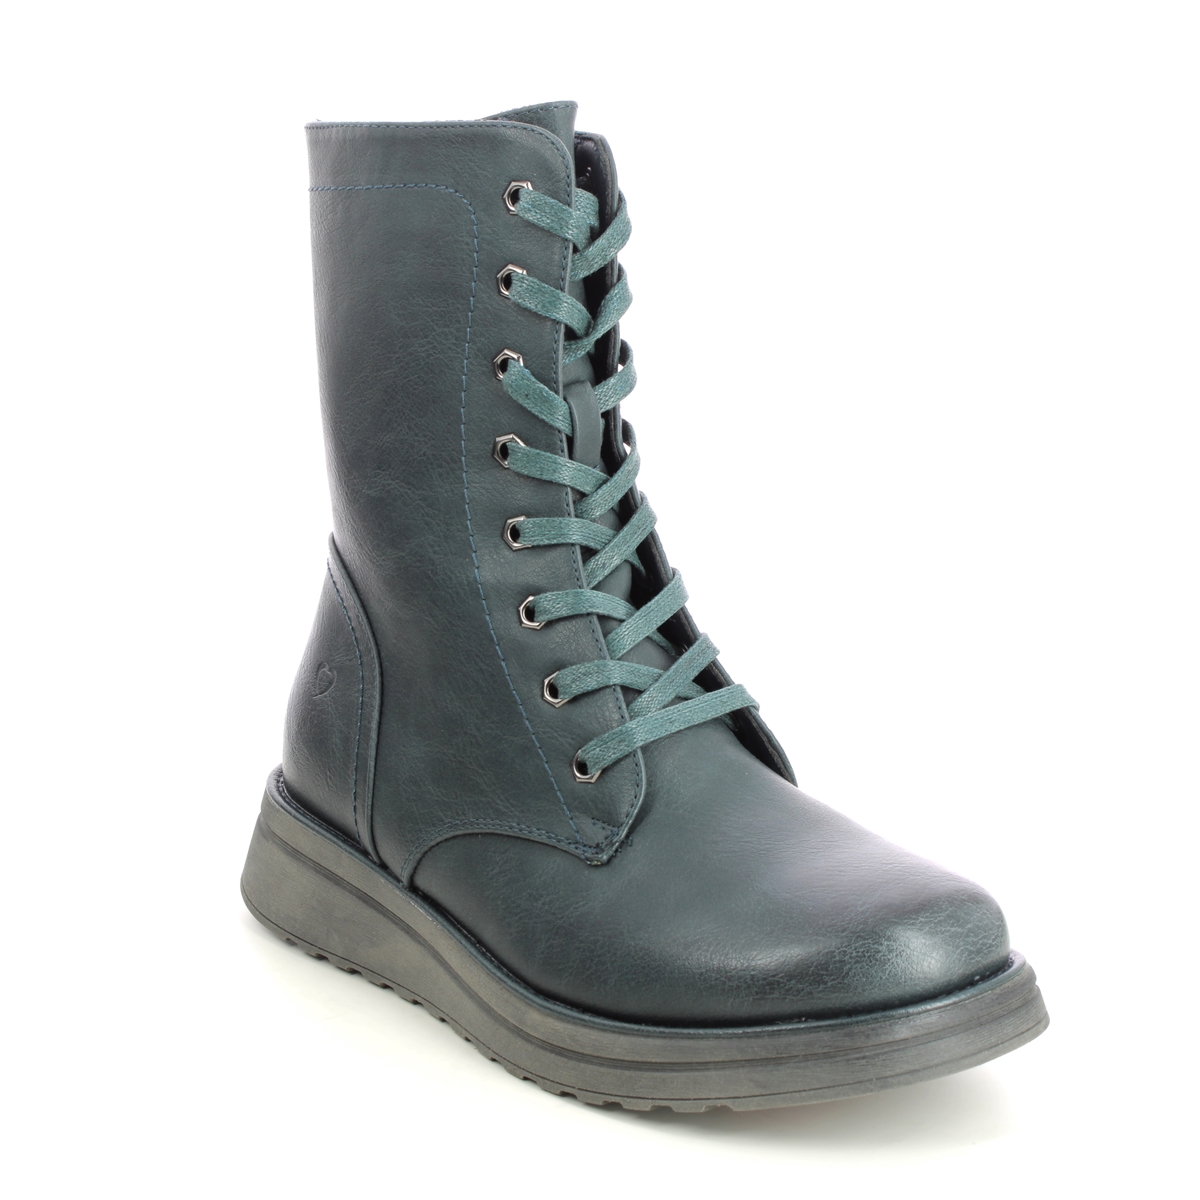 Heavenly Feet Martina Walker Teal Blue Womens Lace Up Boots 3509-73 In Size 5 In Plain Teal Blue